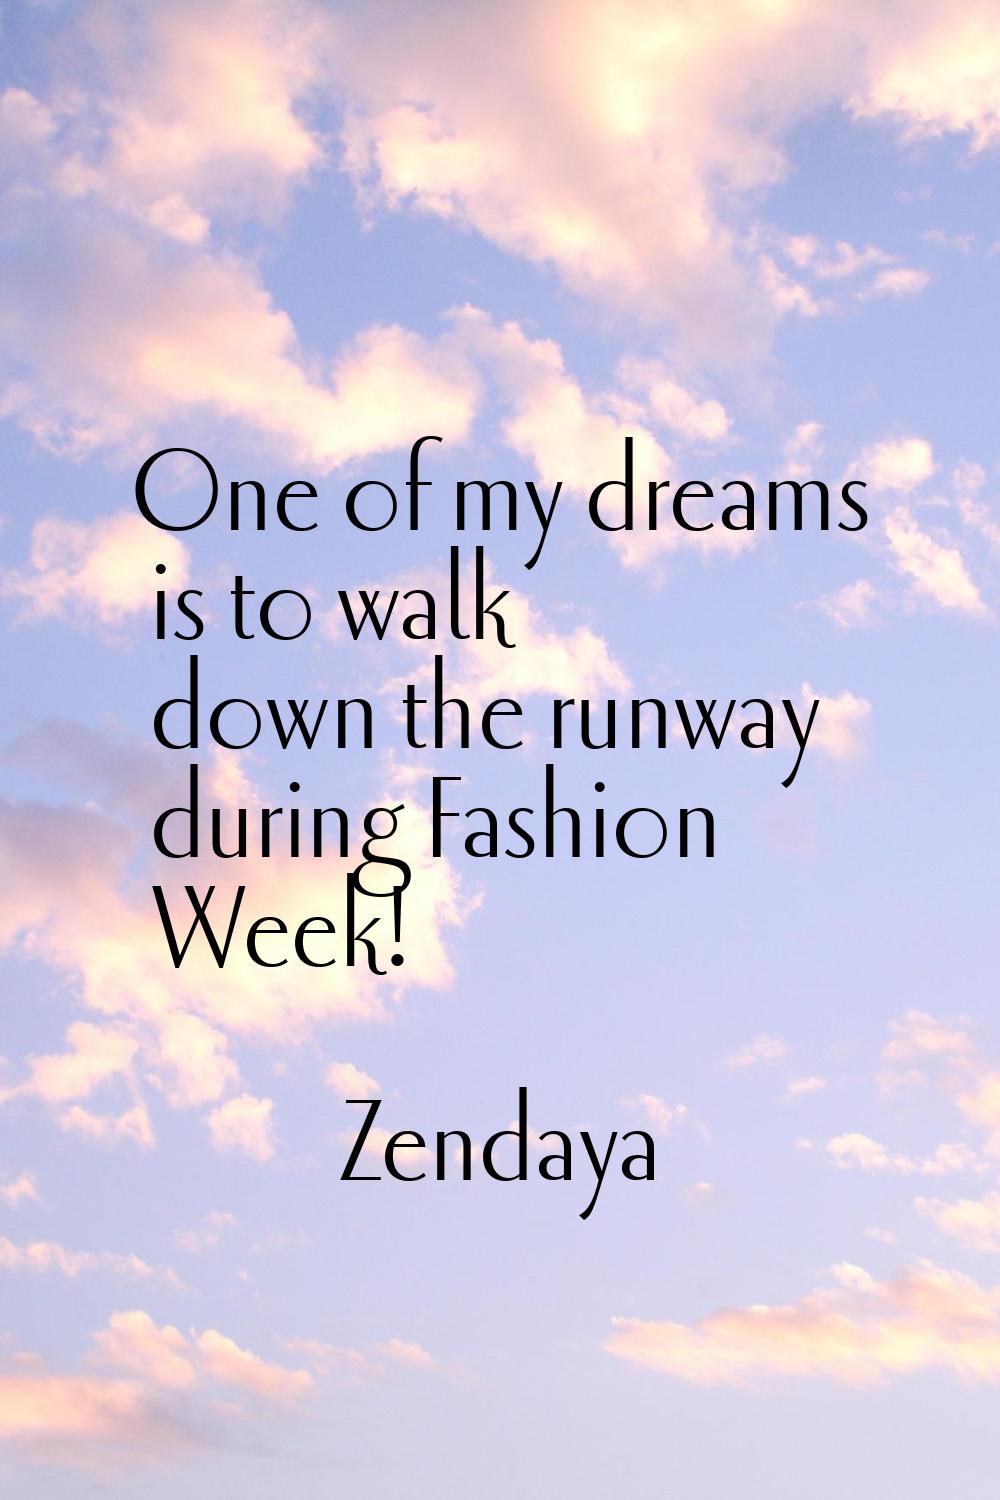 One of my dreams is to walk down the runway during Fashion Week!